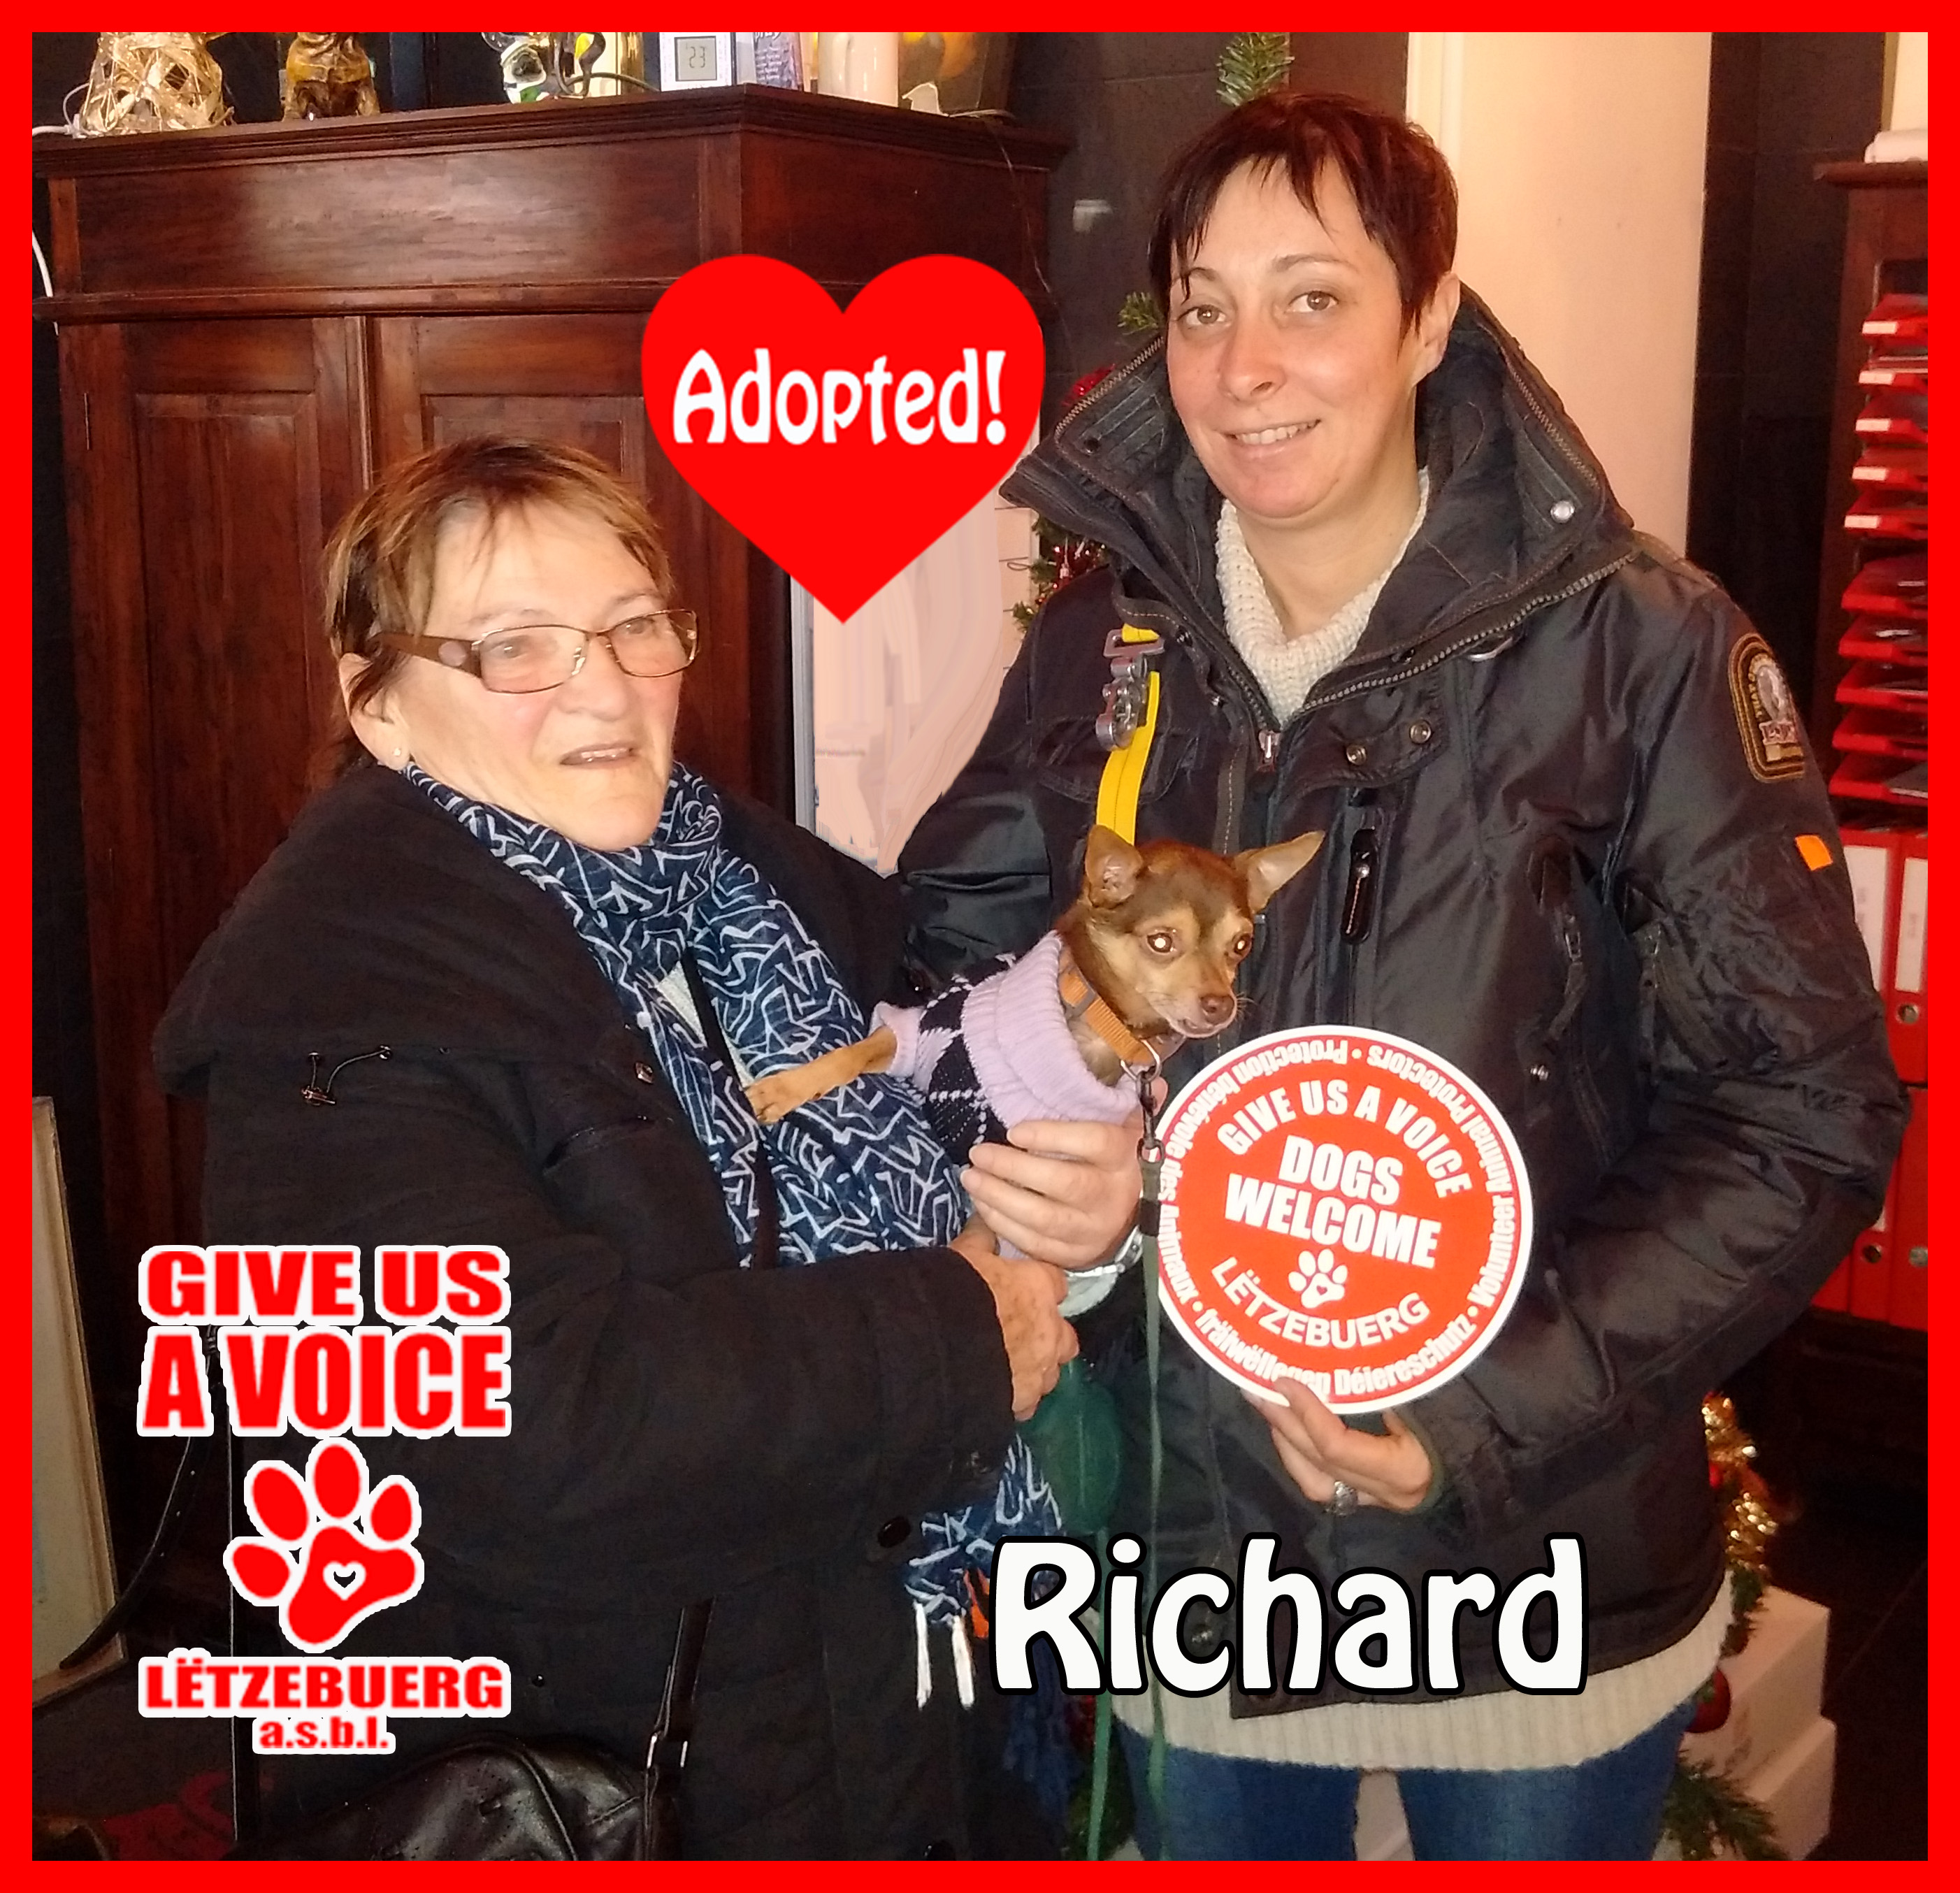 Richard adopted copy